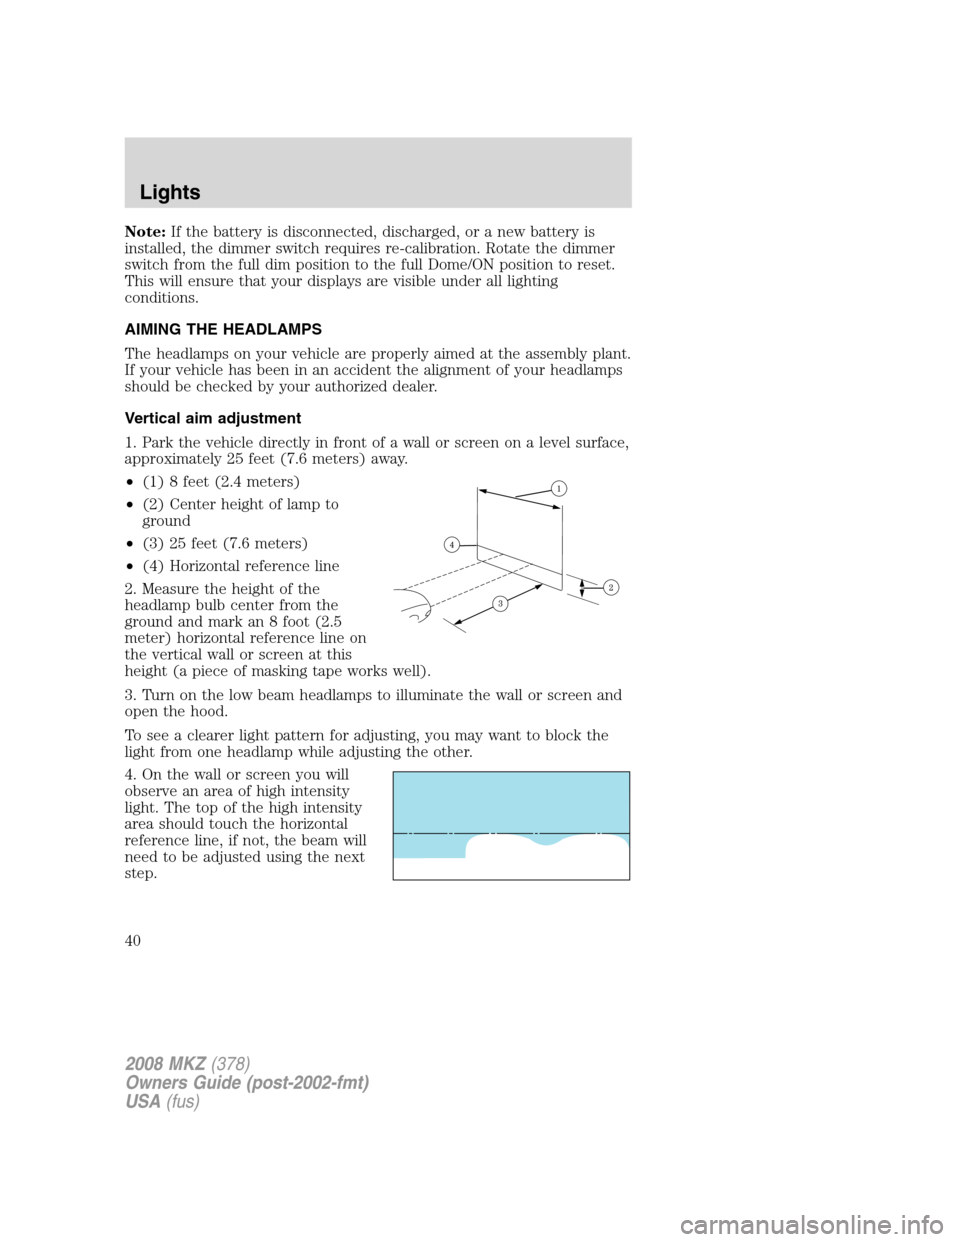 LINCOLN MKZ 2008  Owners Manual Note:If the battery is disconnected, discharged, or a new battery is
installed, the dimmer switch requires re-calibration. Rotate the dimmer
switch from the full dim position to the full Dome/ON posit